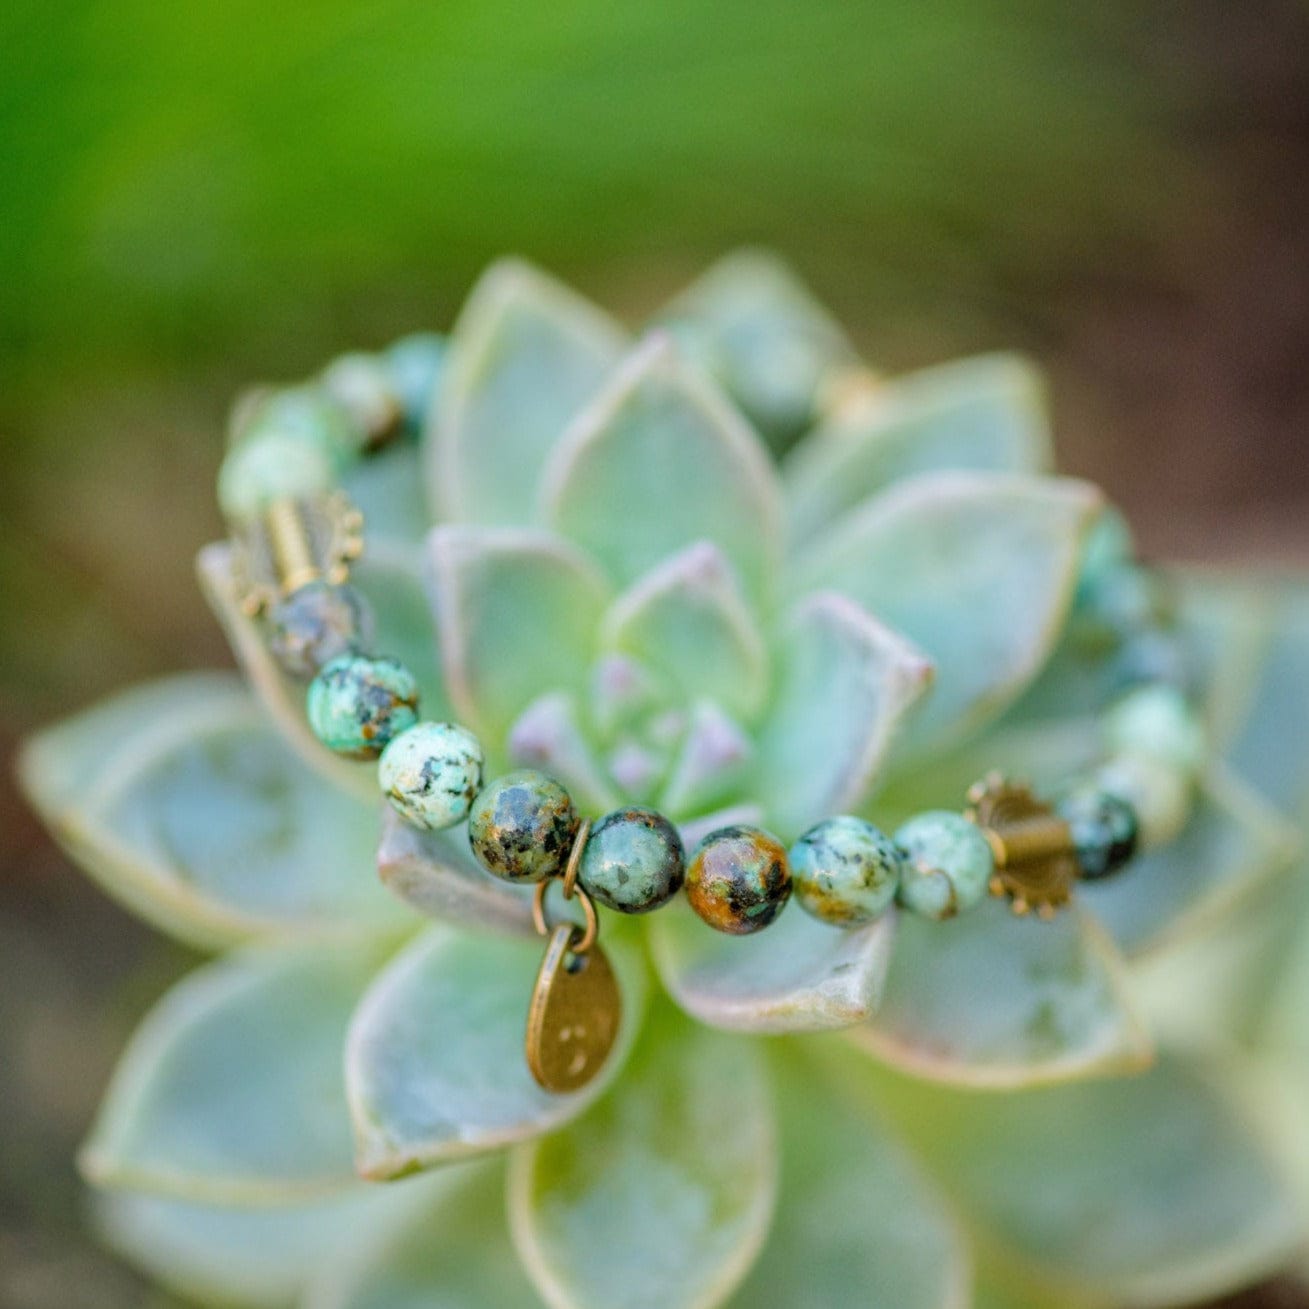 Handcrafted African Turquoise Bracelet